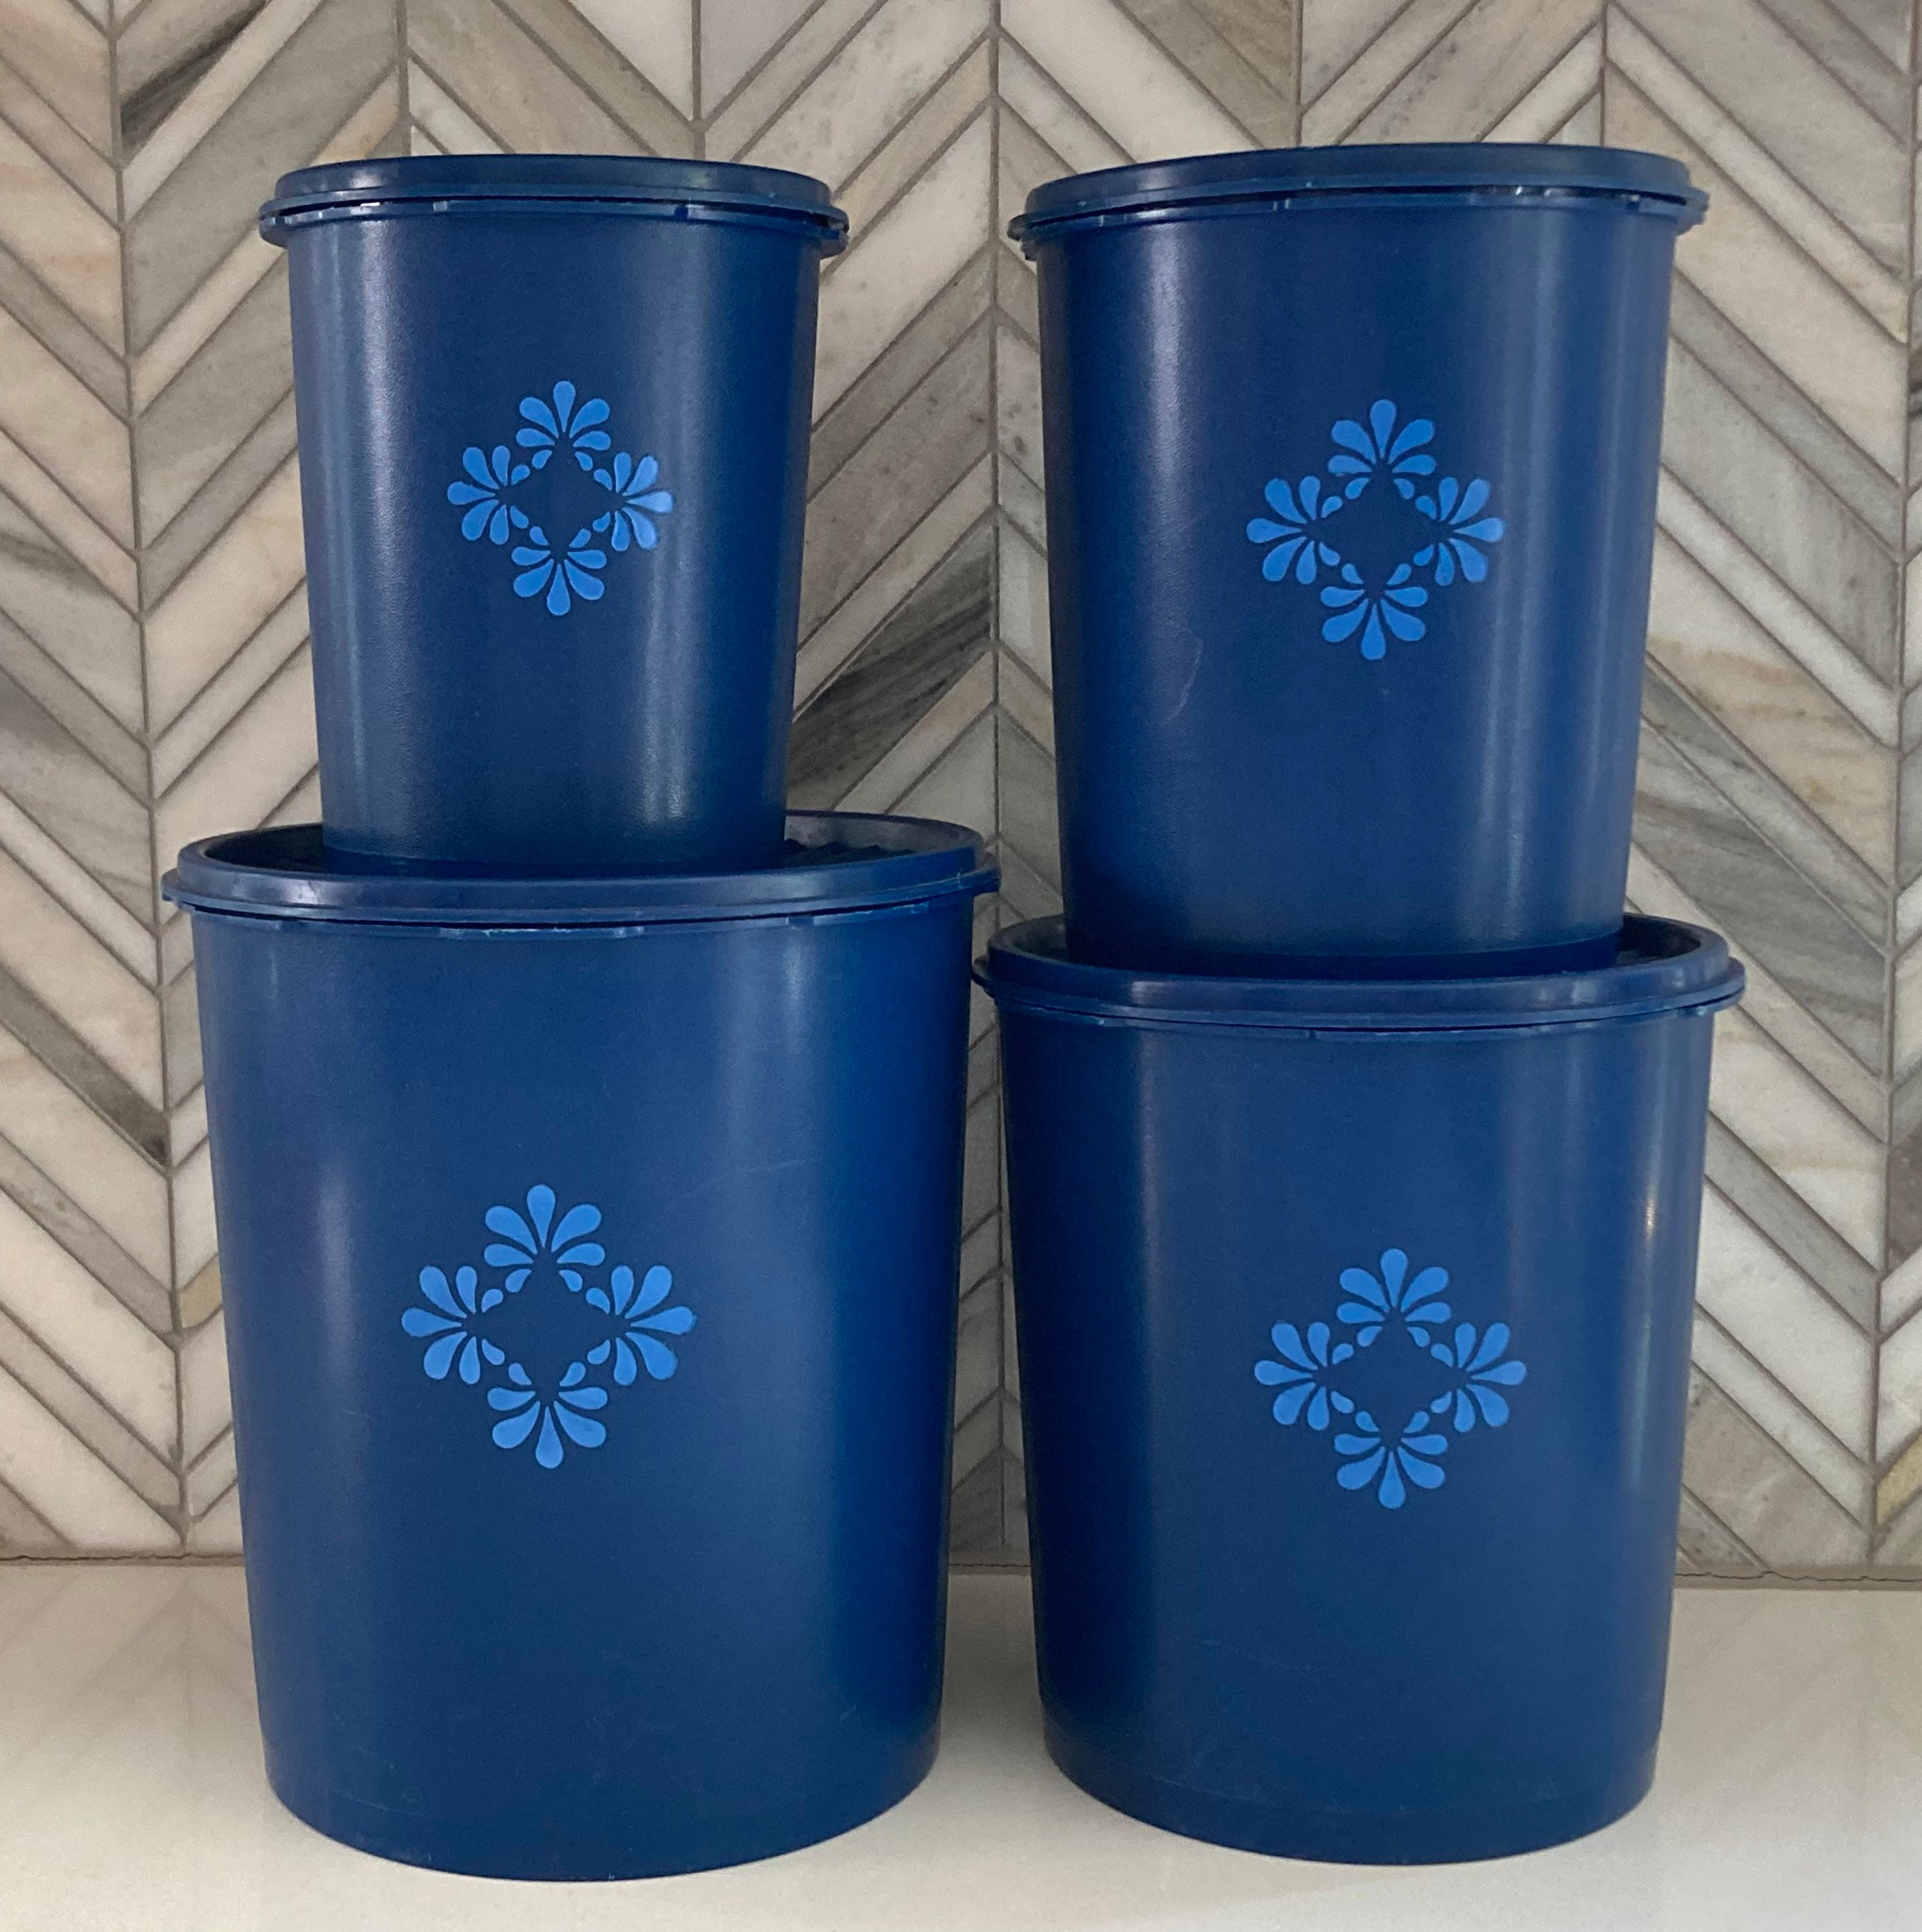 Tupperware Servalier Stacking Cookie / Snack Canister Dark Blue 7.5 Cups  Sale